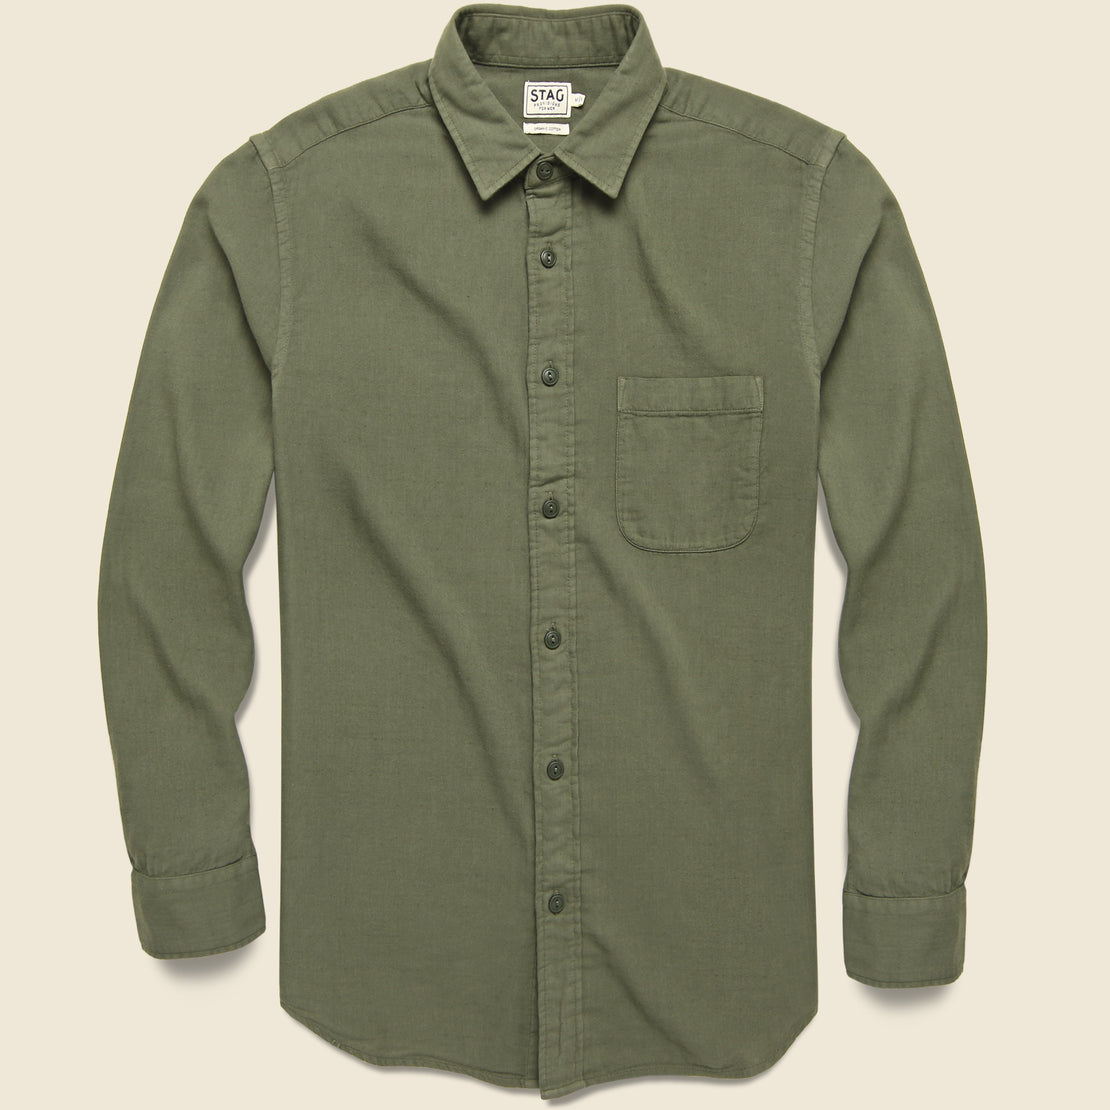 STAG Garment-Dyed Double Cloth Shirt - Olive